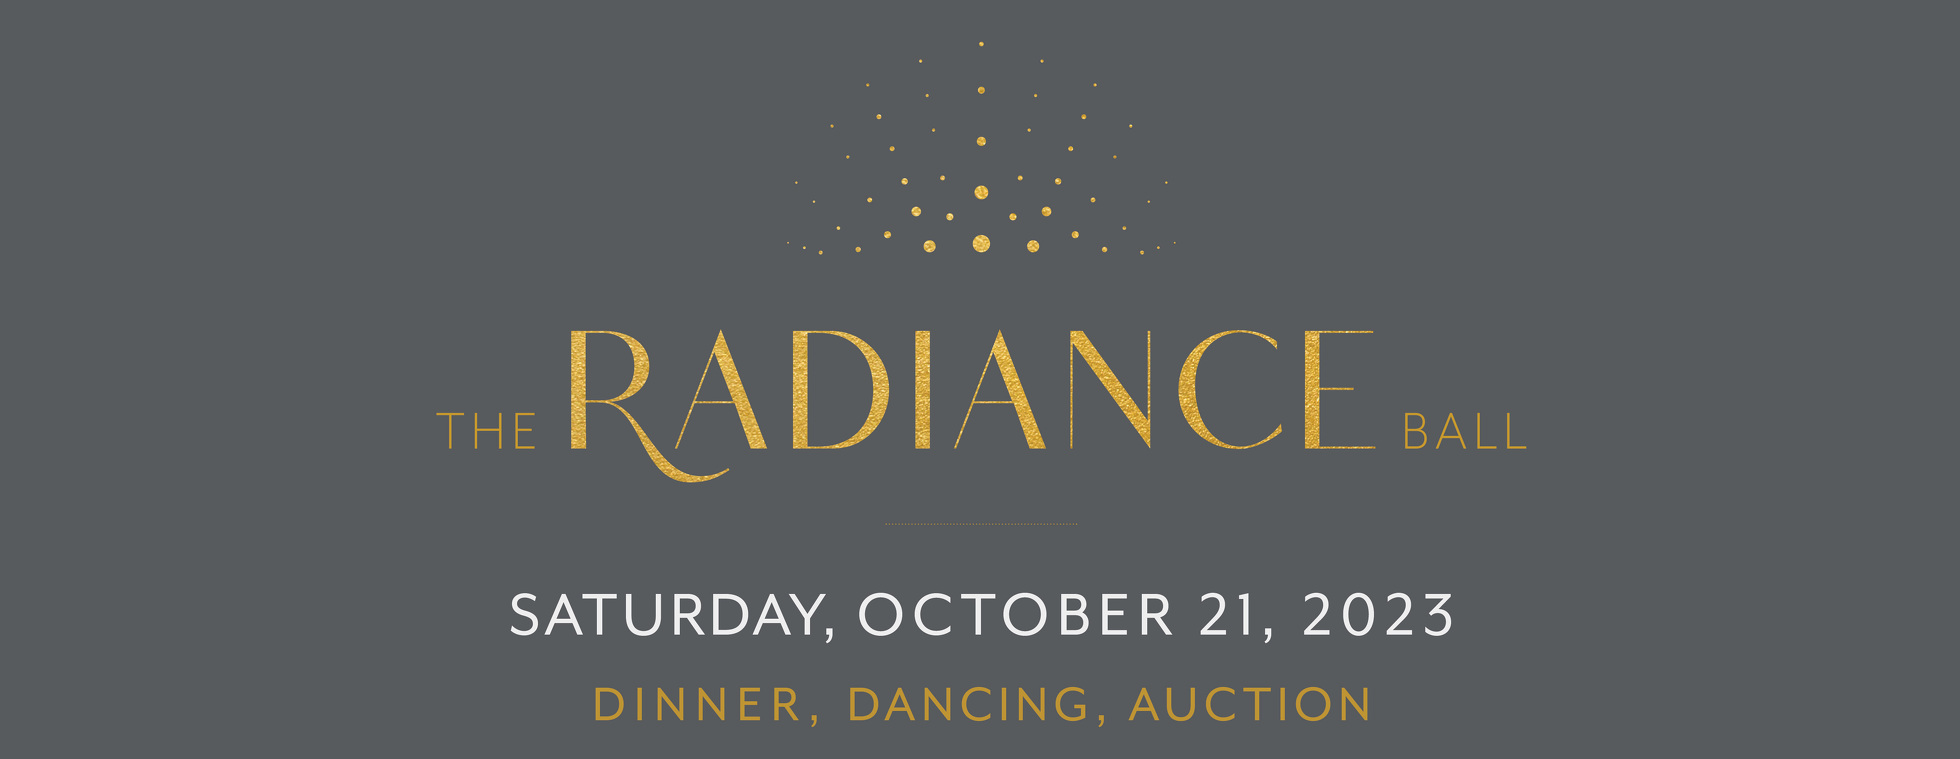 The Radiance Ball